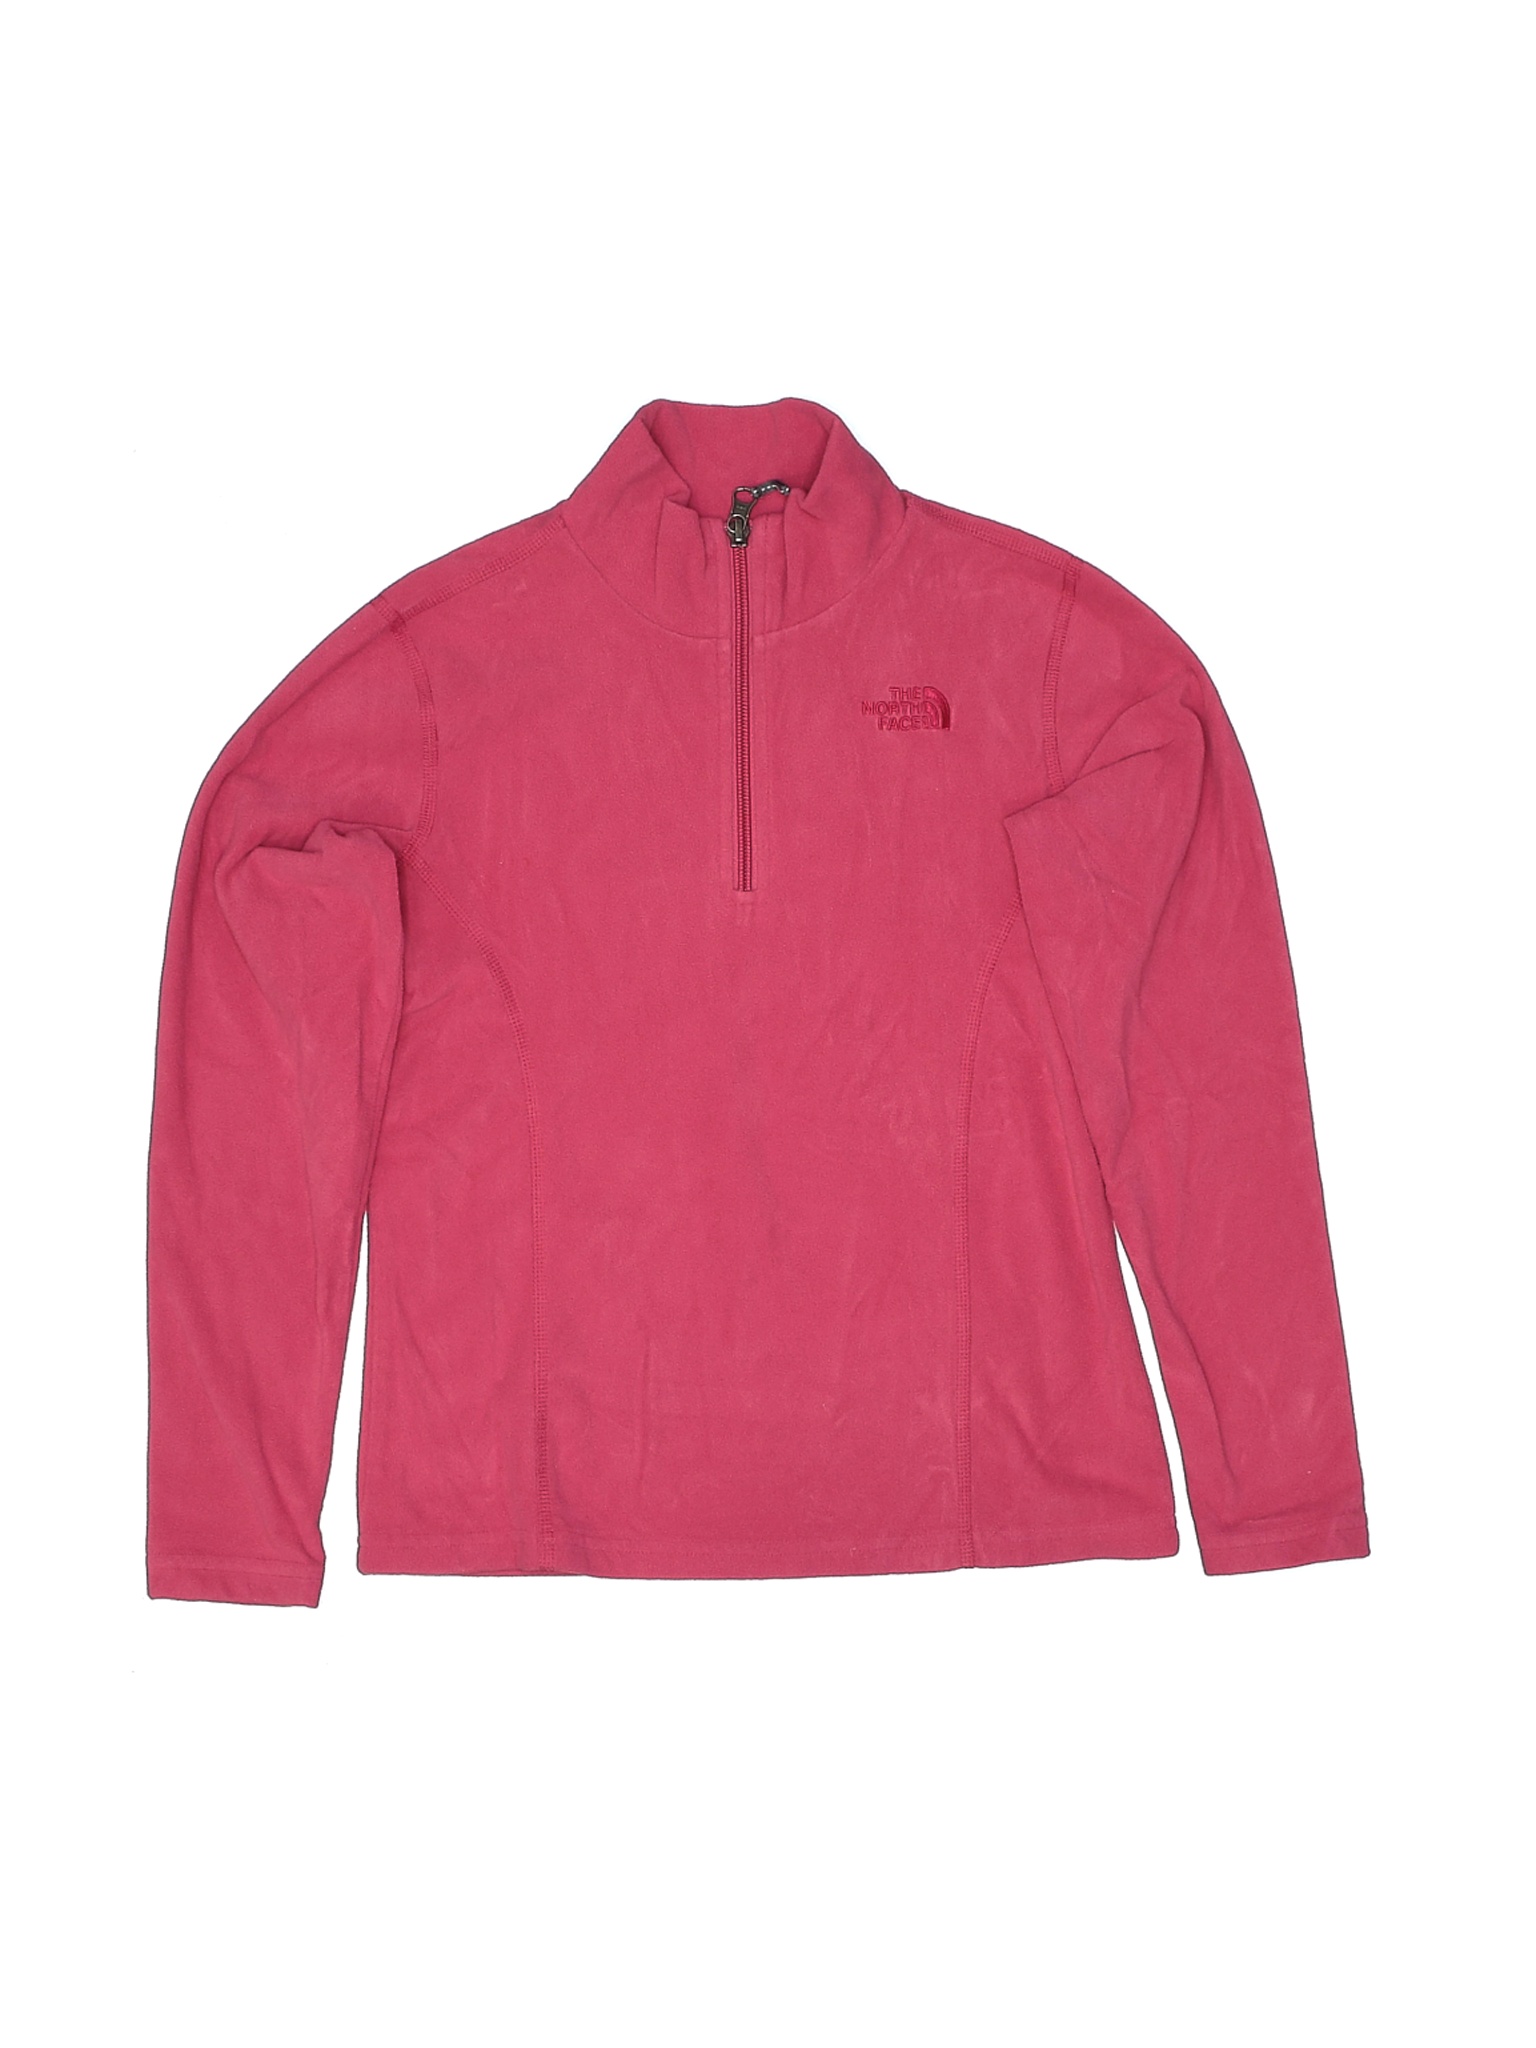 The North Face Girls Pink Turtleneck Sweater M Youth | eBay